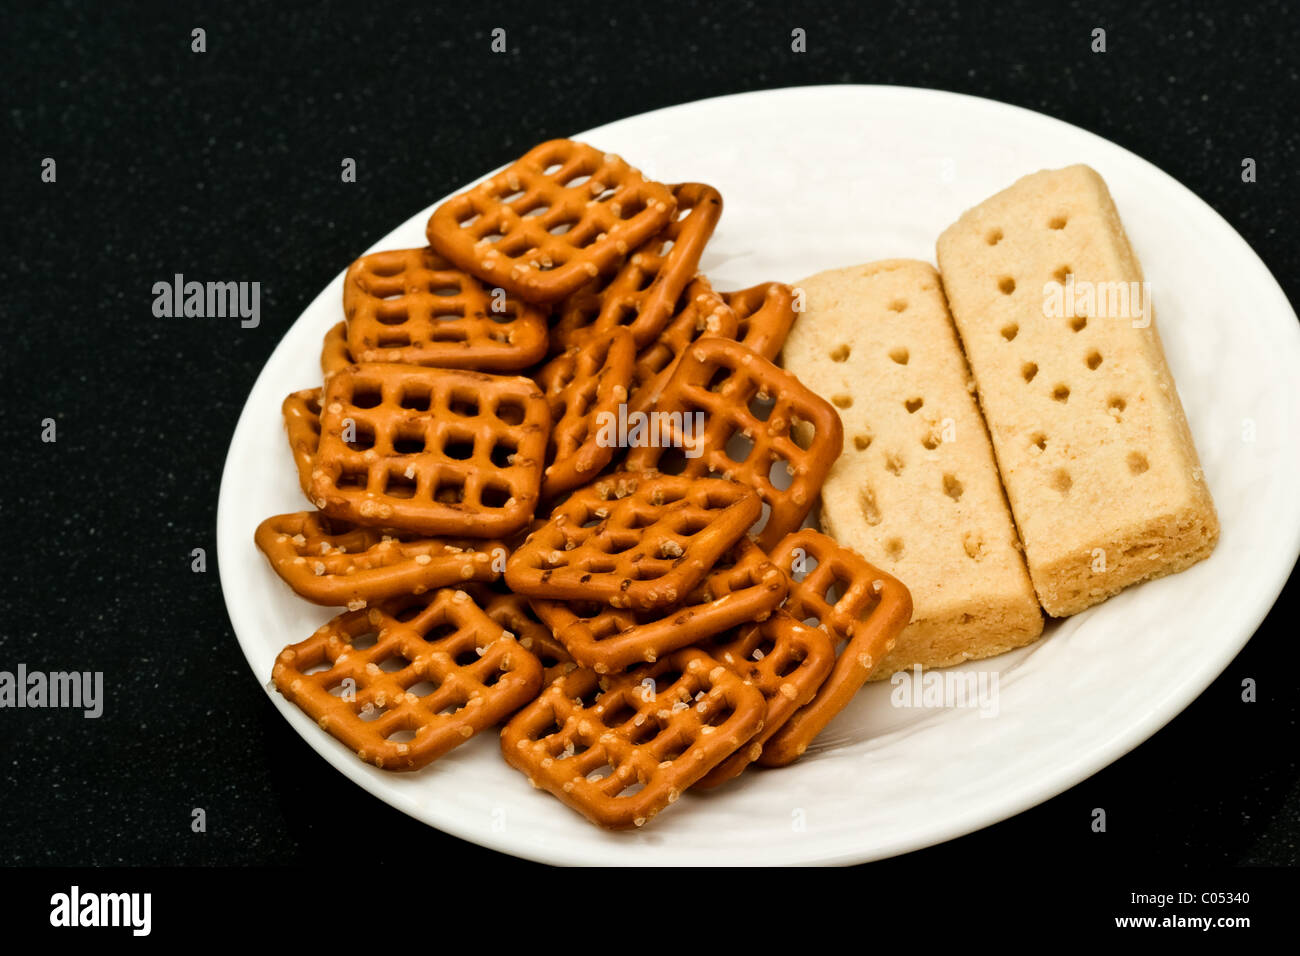 Two shortbread cookie fingers with snack food on a white plate Stock Photo